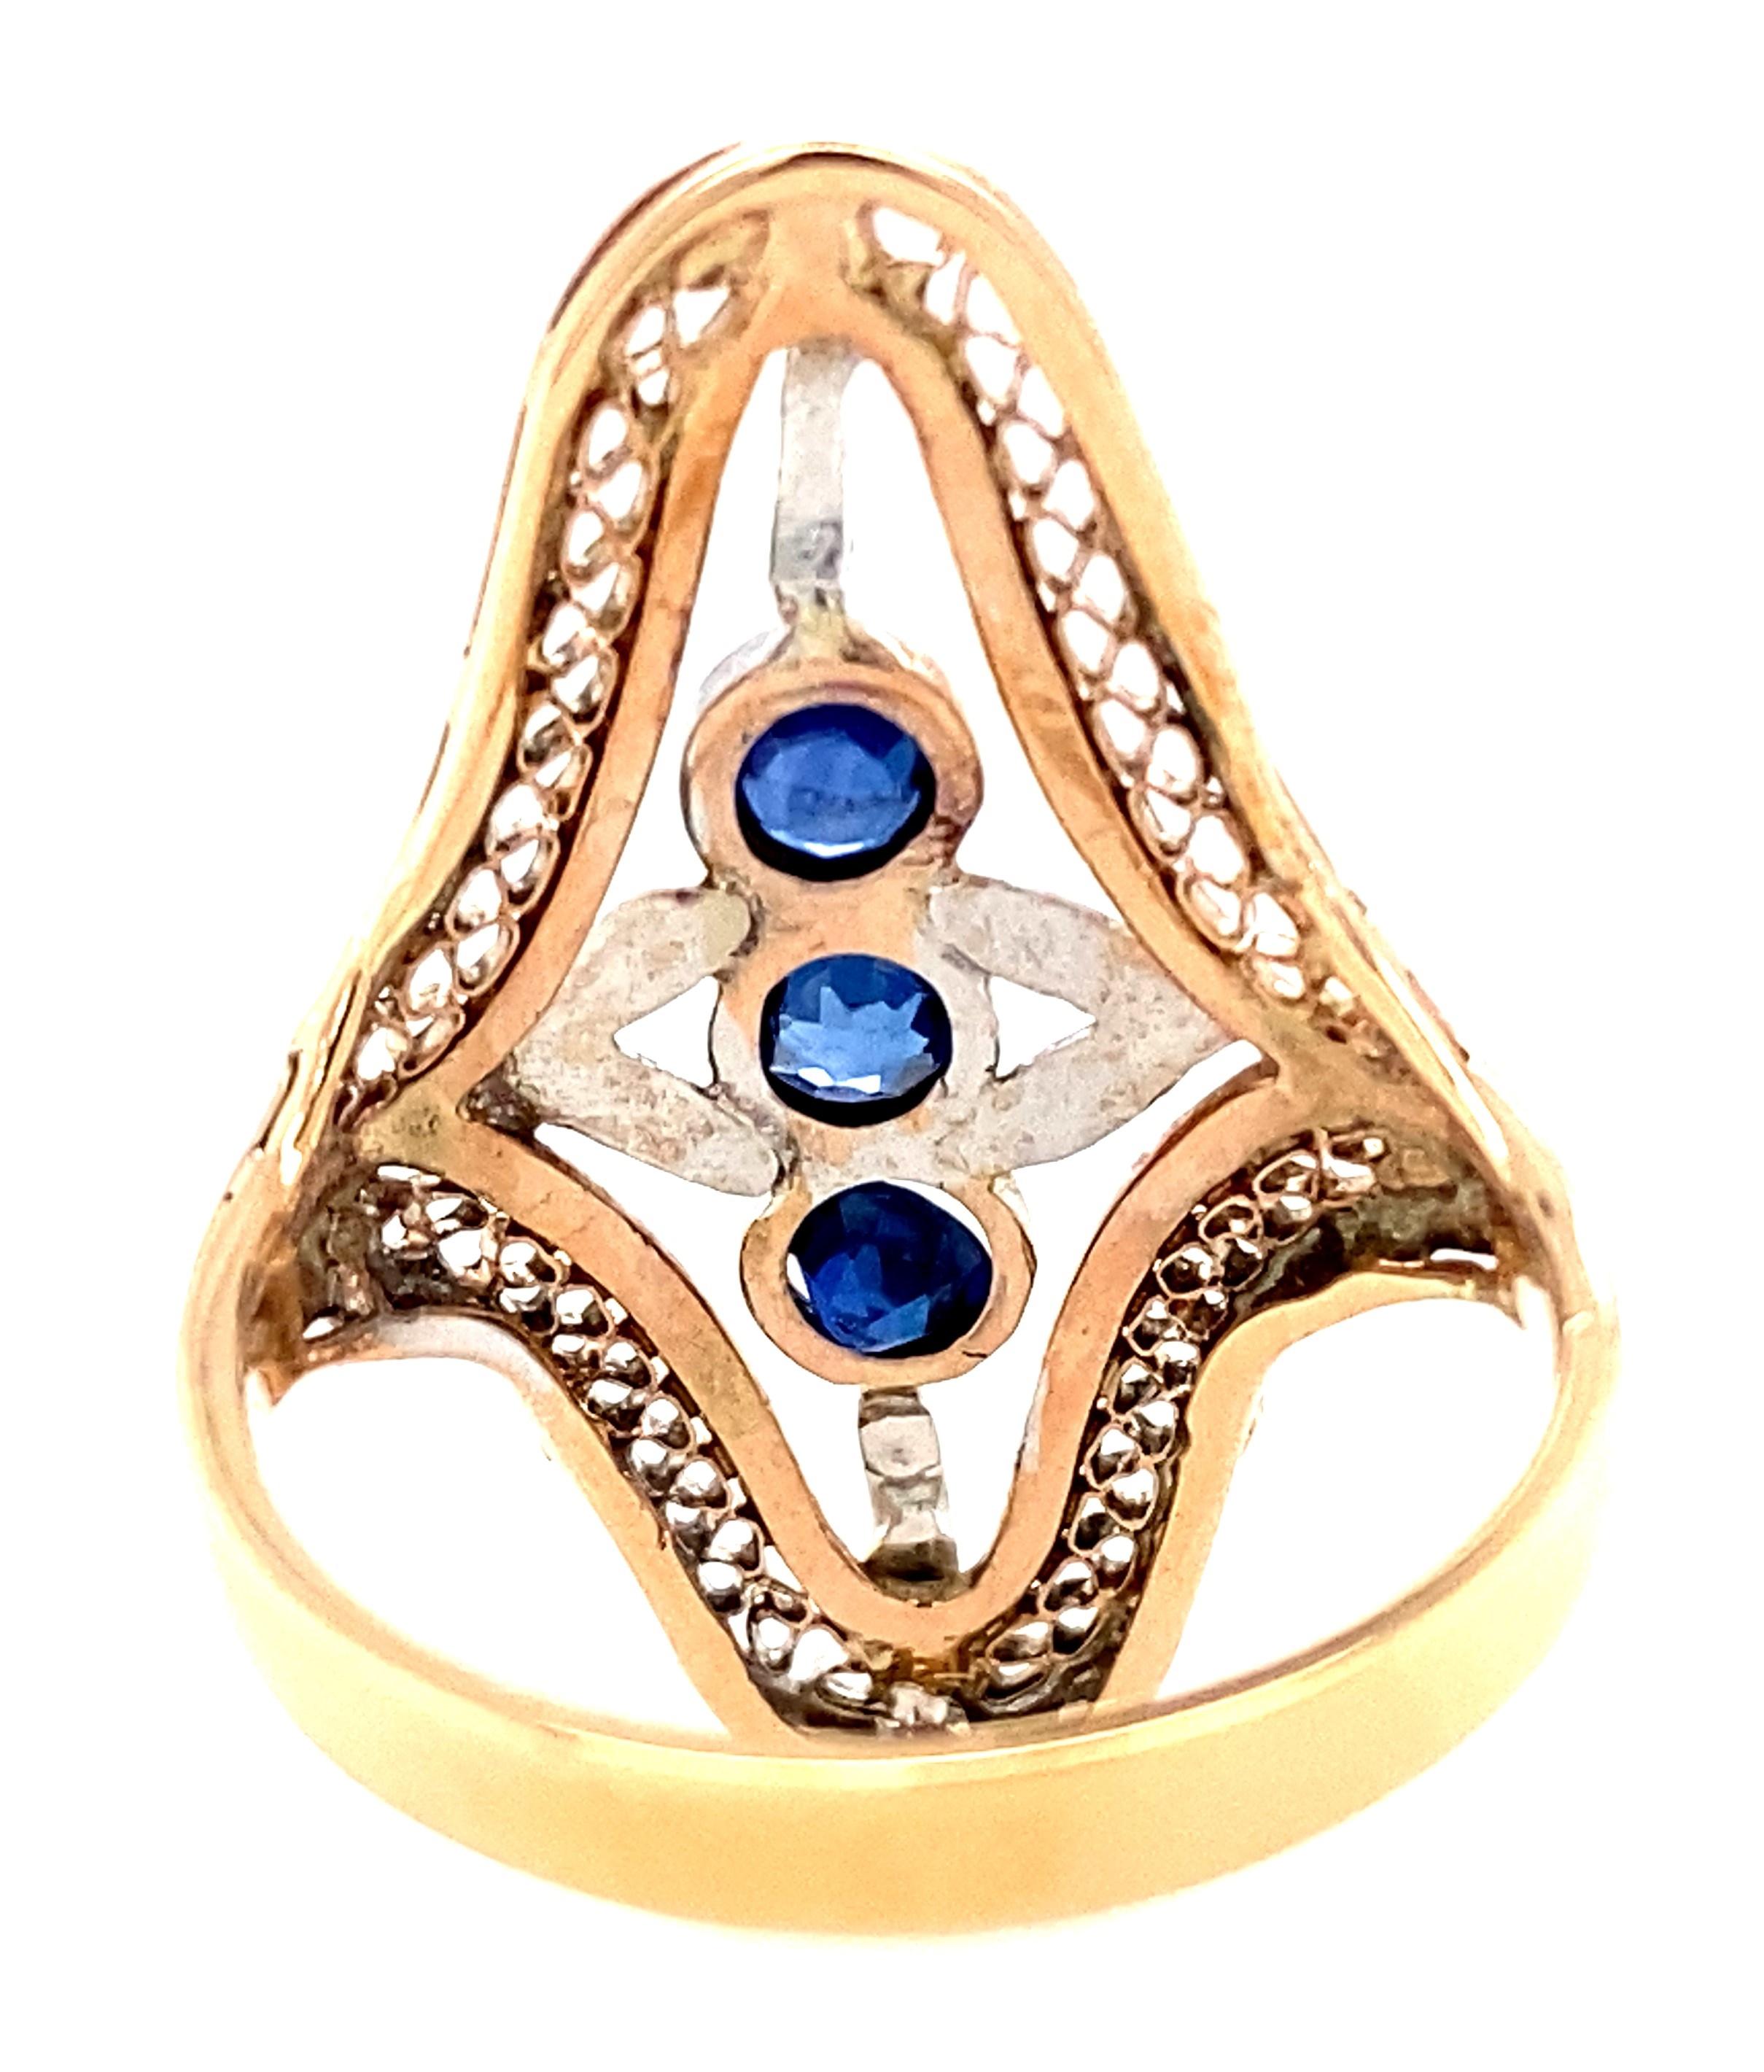 14k Yellow and White Gold Two Tone Sapphire Ring with Filigree Edge In Good Condition For Sale In Towson, MD